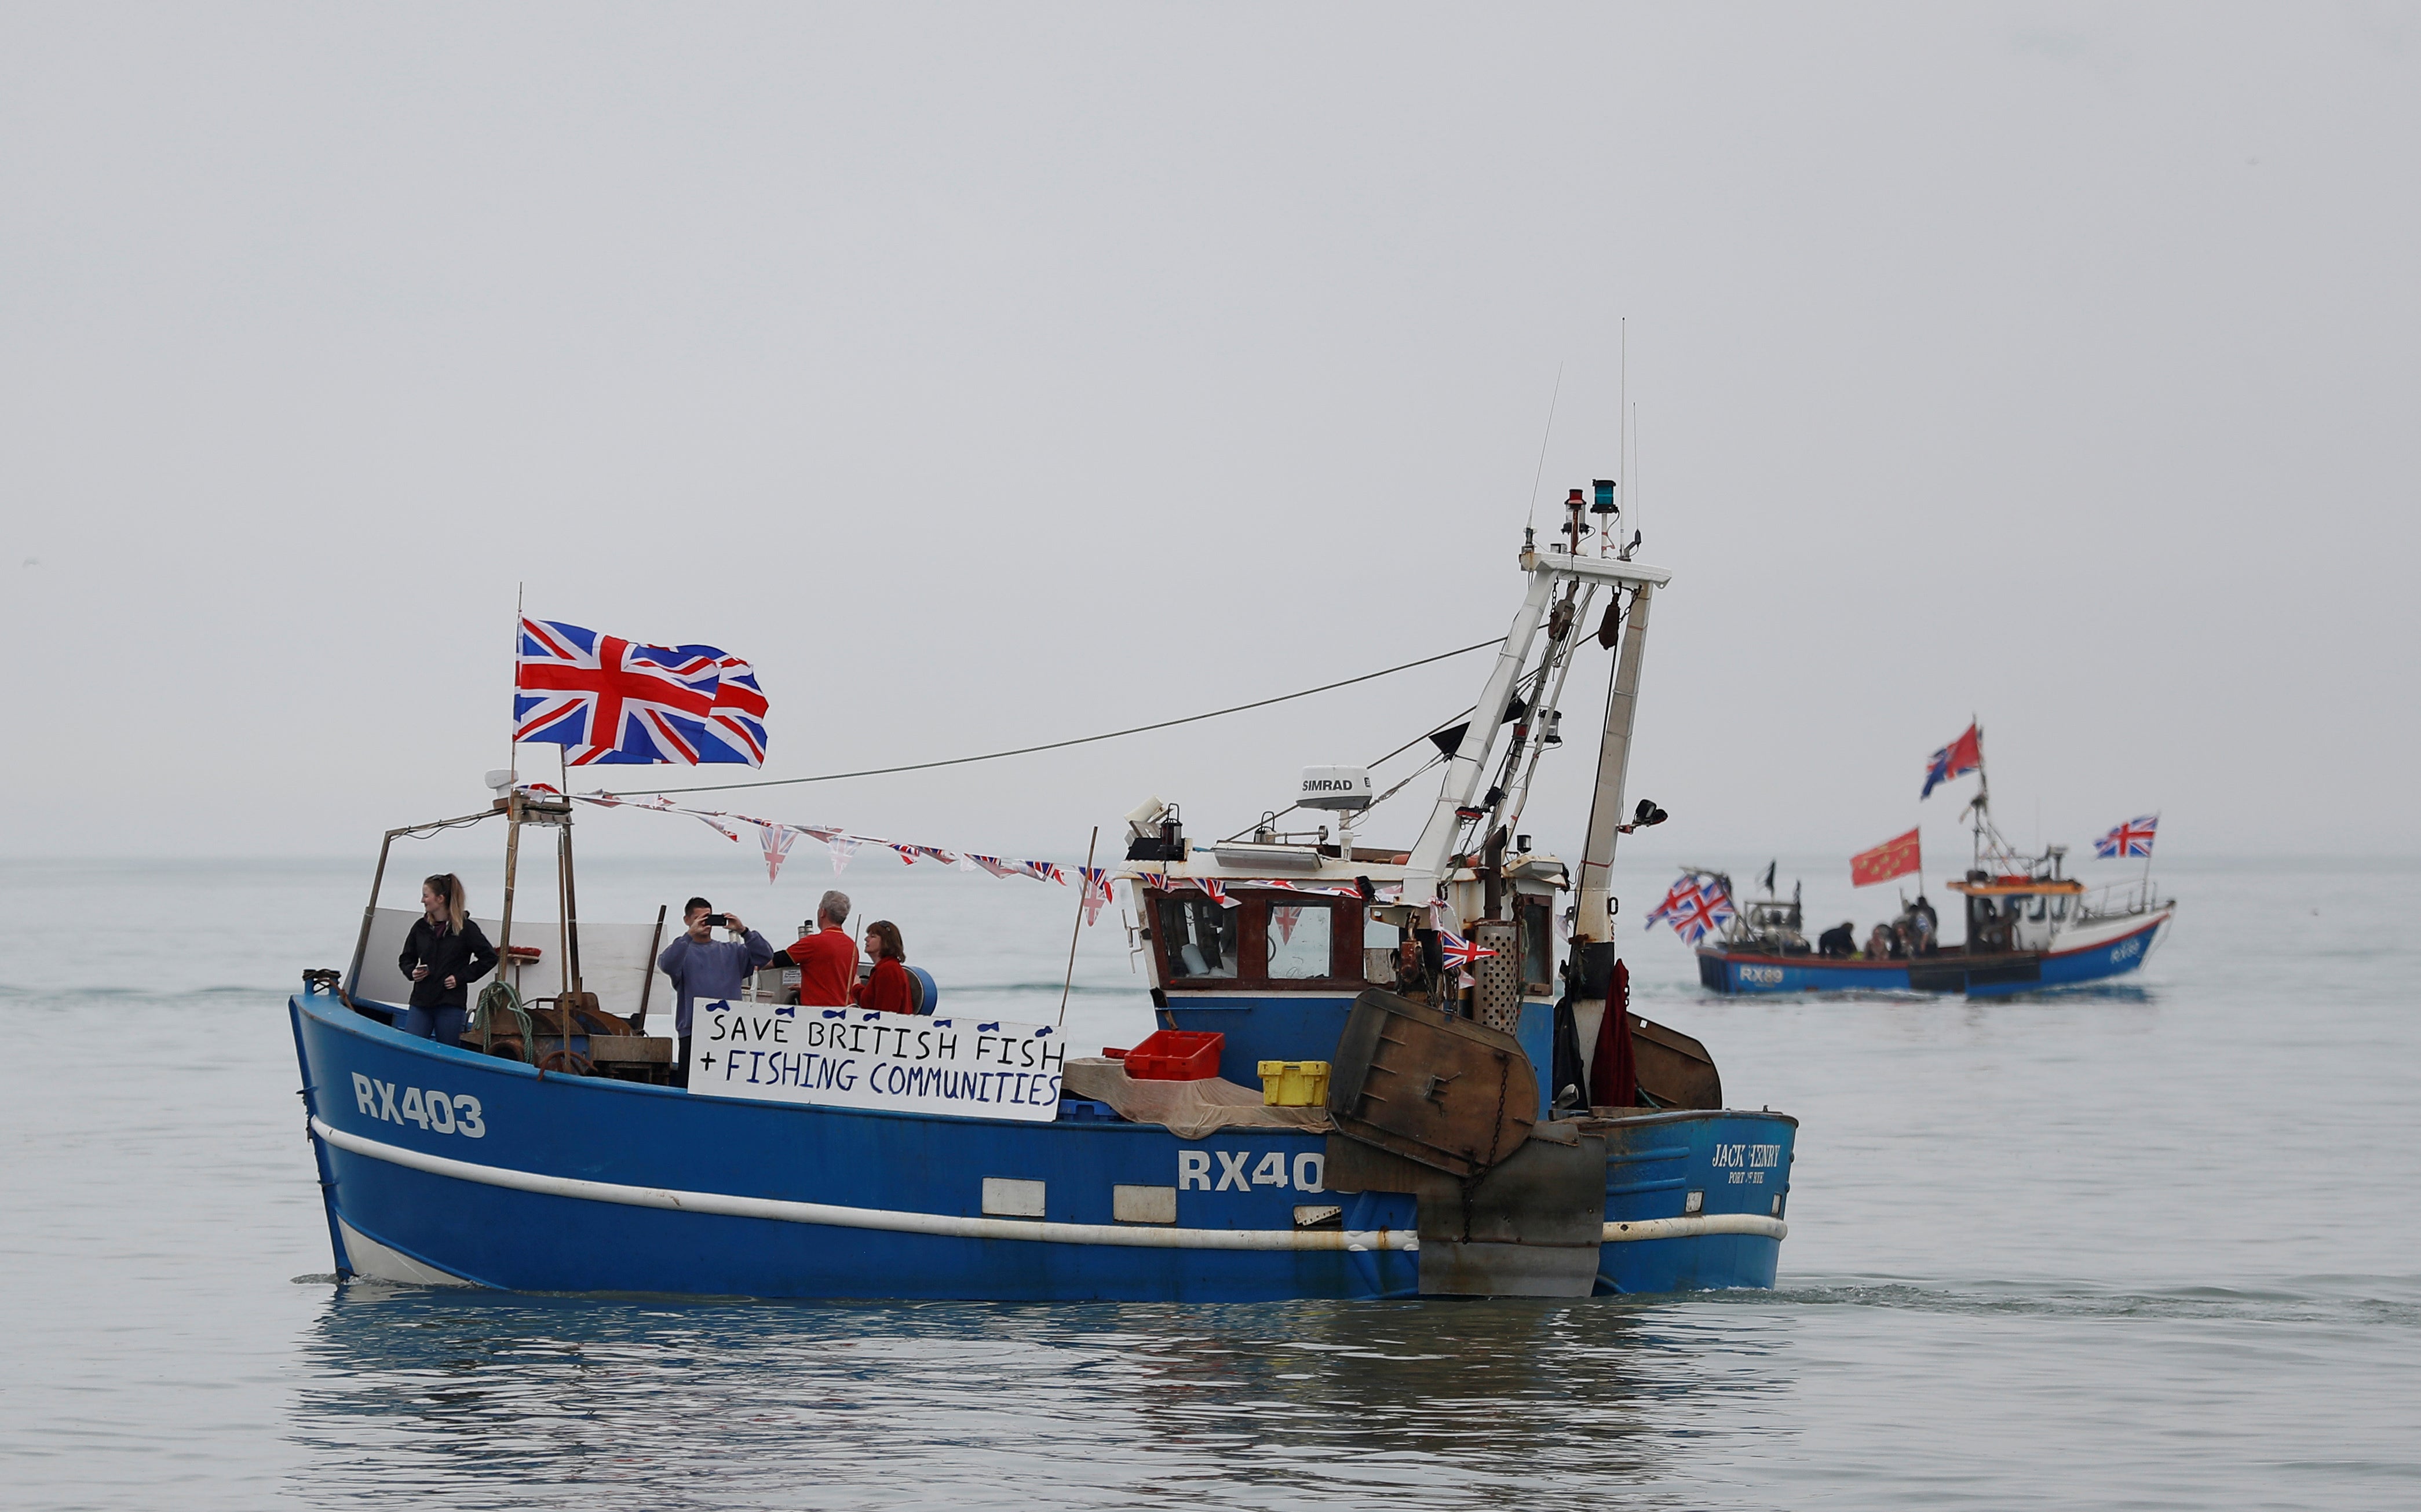 Protests staged by the campaign group ‘Fishing for Leave’